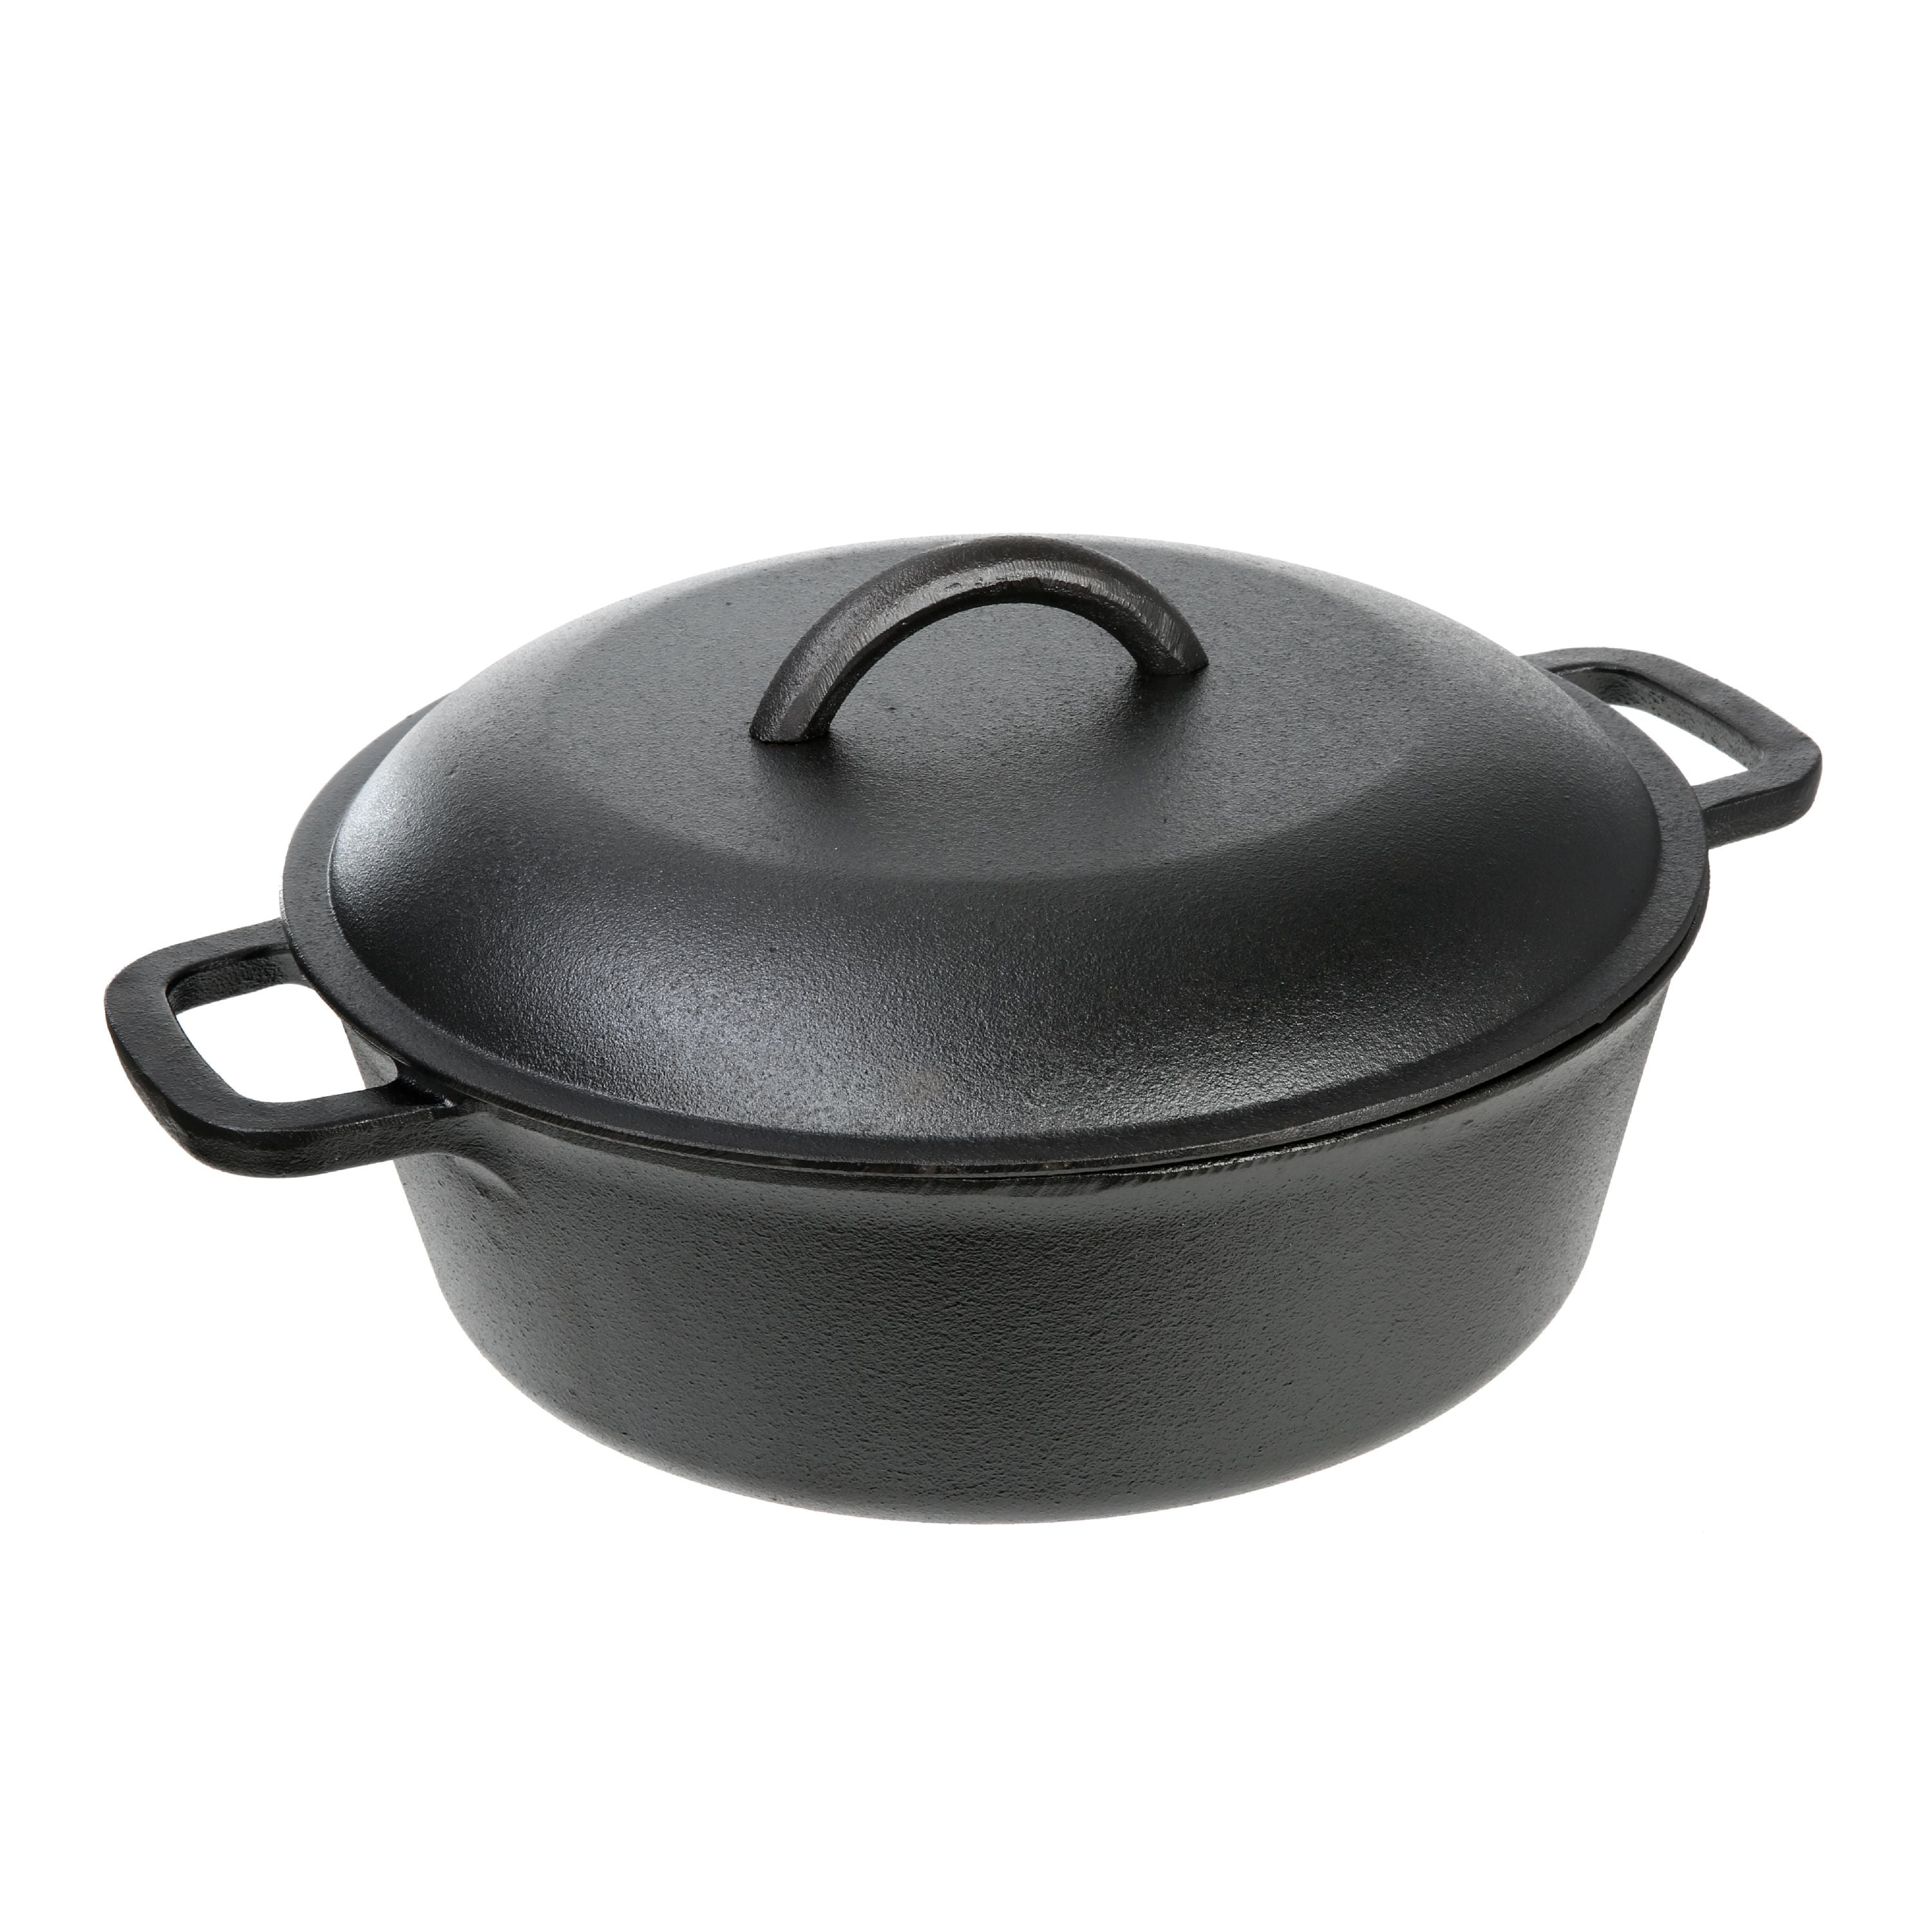 Kohl's Black Friday Deal  5.5-Qt Cast-Iron Dutch Oven for as Low as $26.49